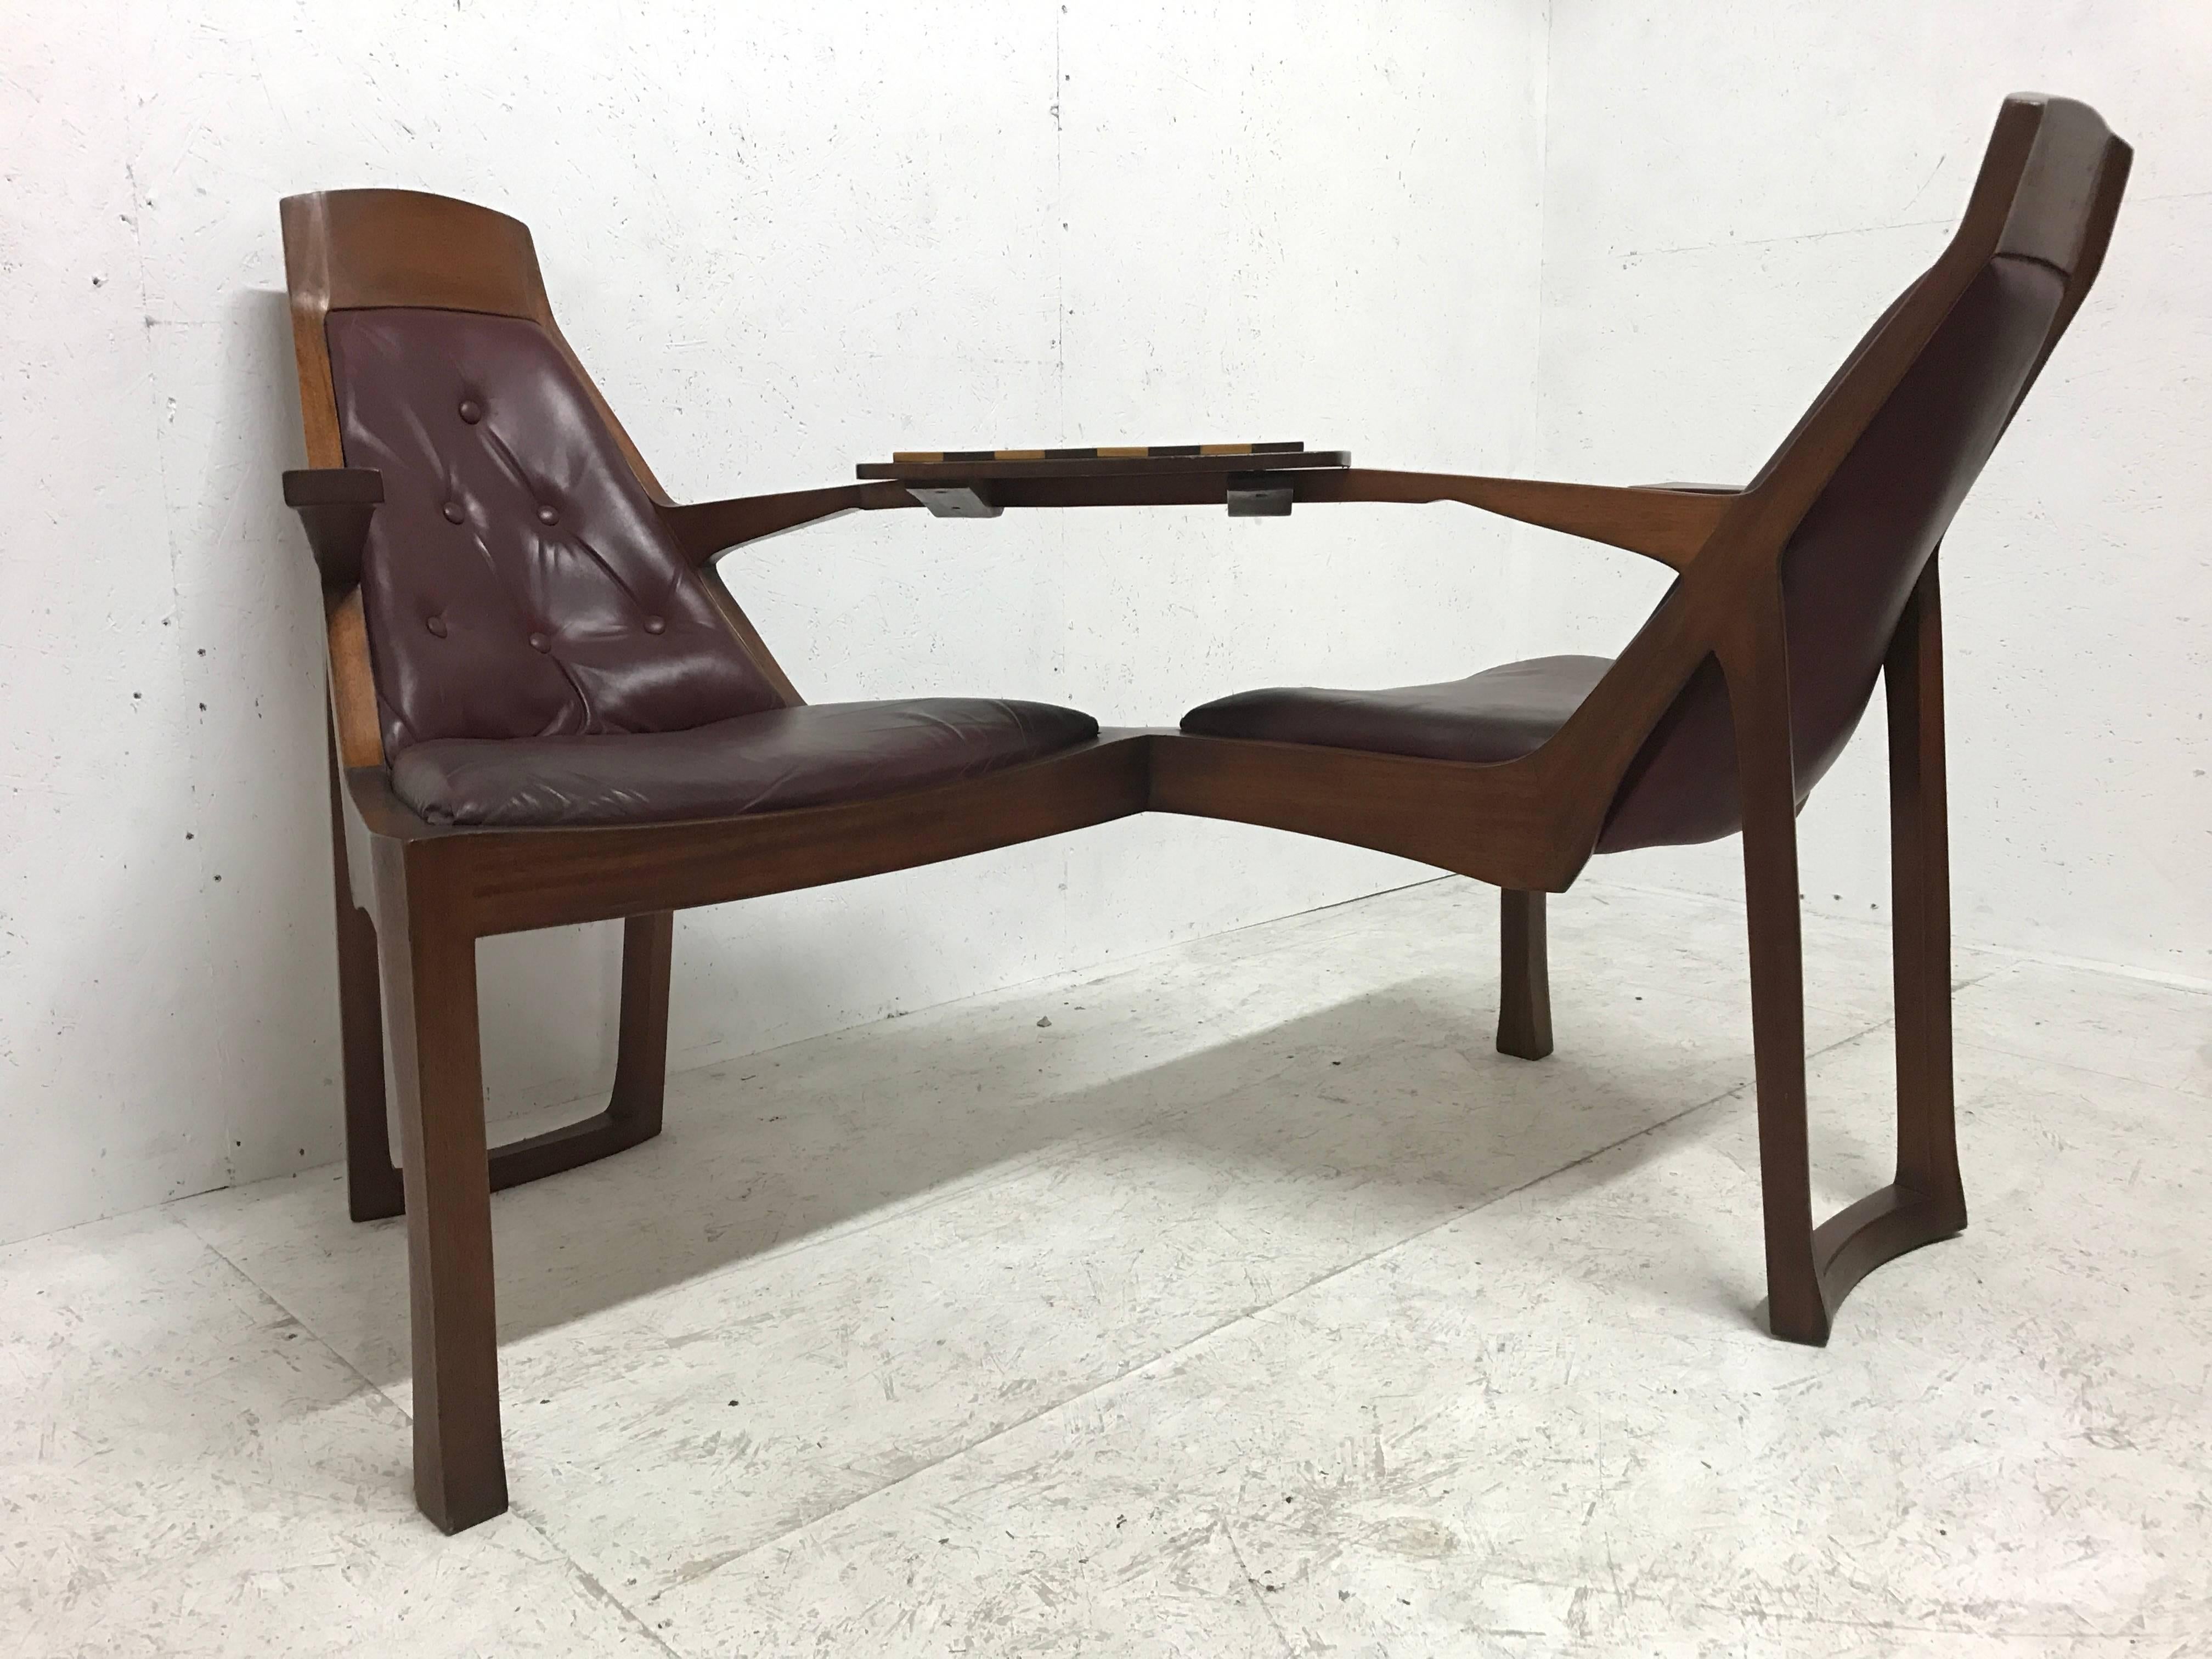 Hand-Crafted Danish Style Teak Duet Seat for Lovers of Chess Signed R Bellinger, 1977